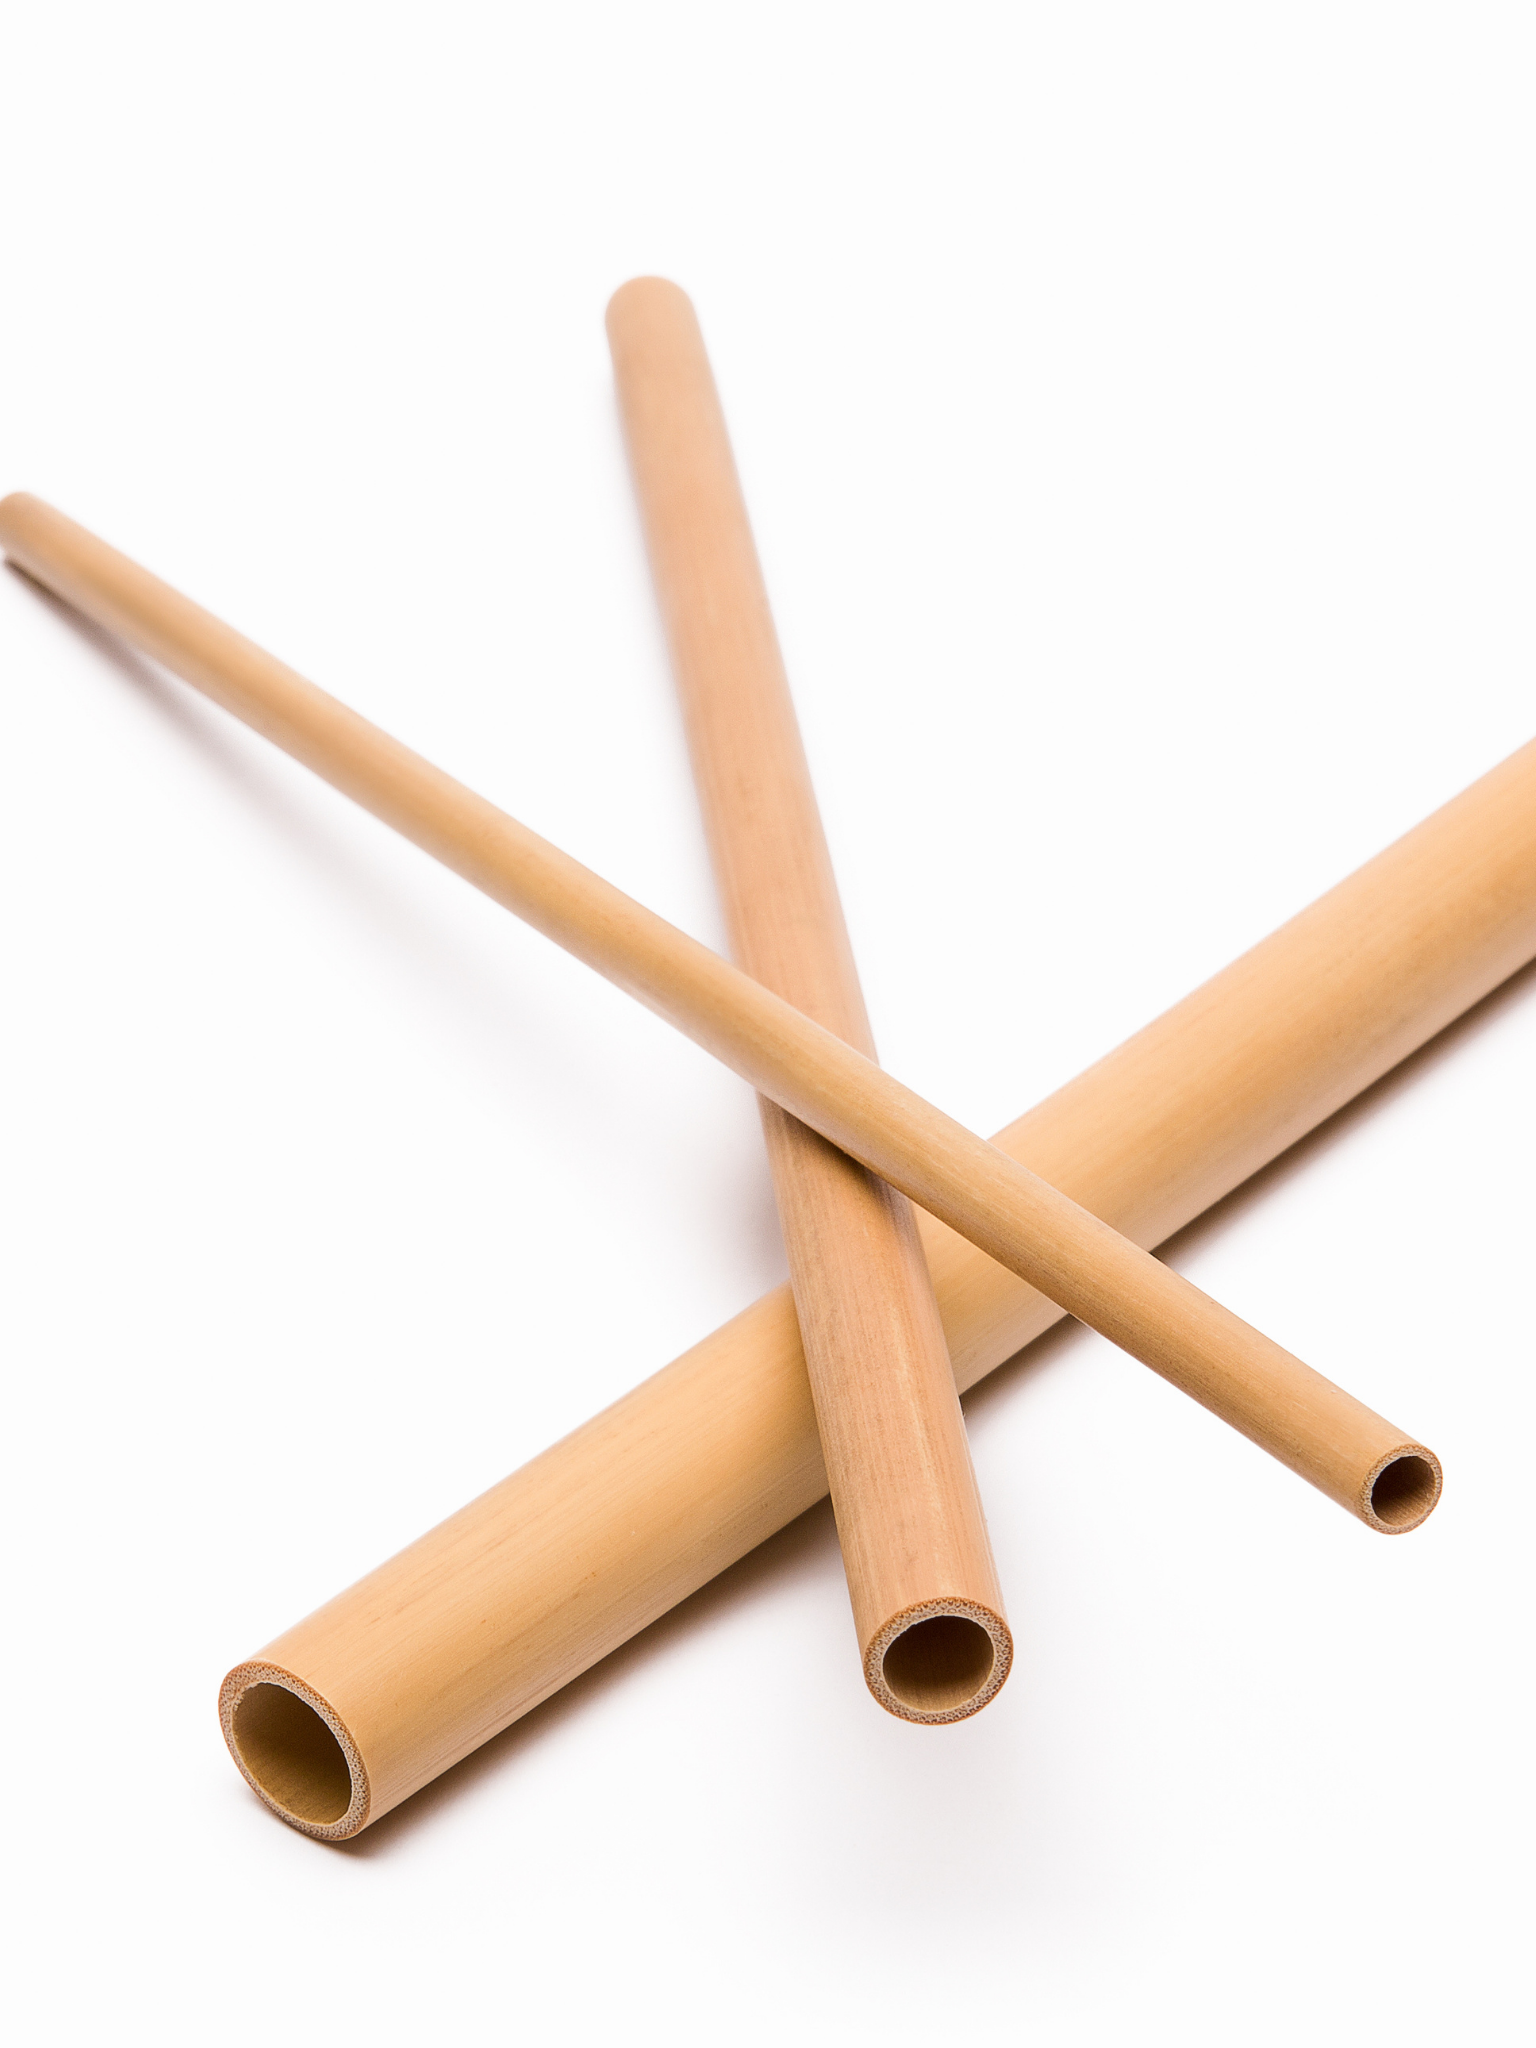 Bamboo straws 3 diameters natural and reusable without plastic